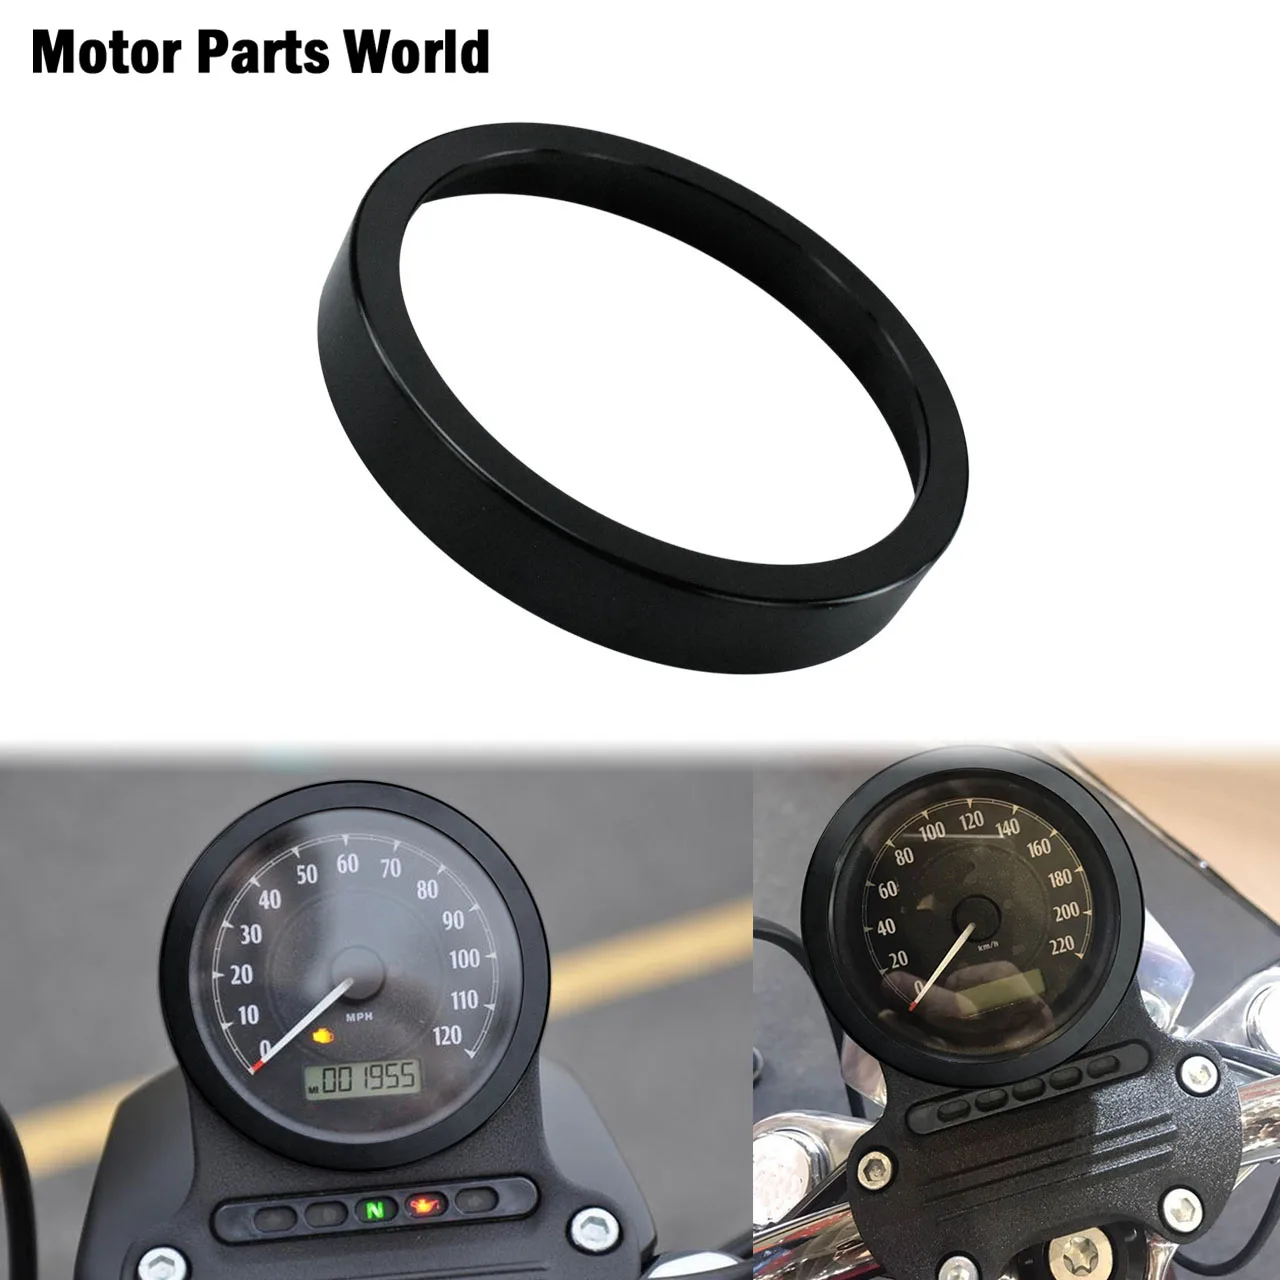 1Pc Motorcycle Black Speedometer Ring Trim Bezel Cover CNC Cut For Harley Dyna Stree Bob Low Rider Sportster XL883 1200